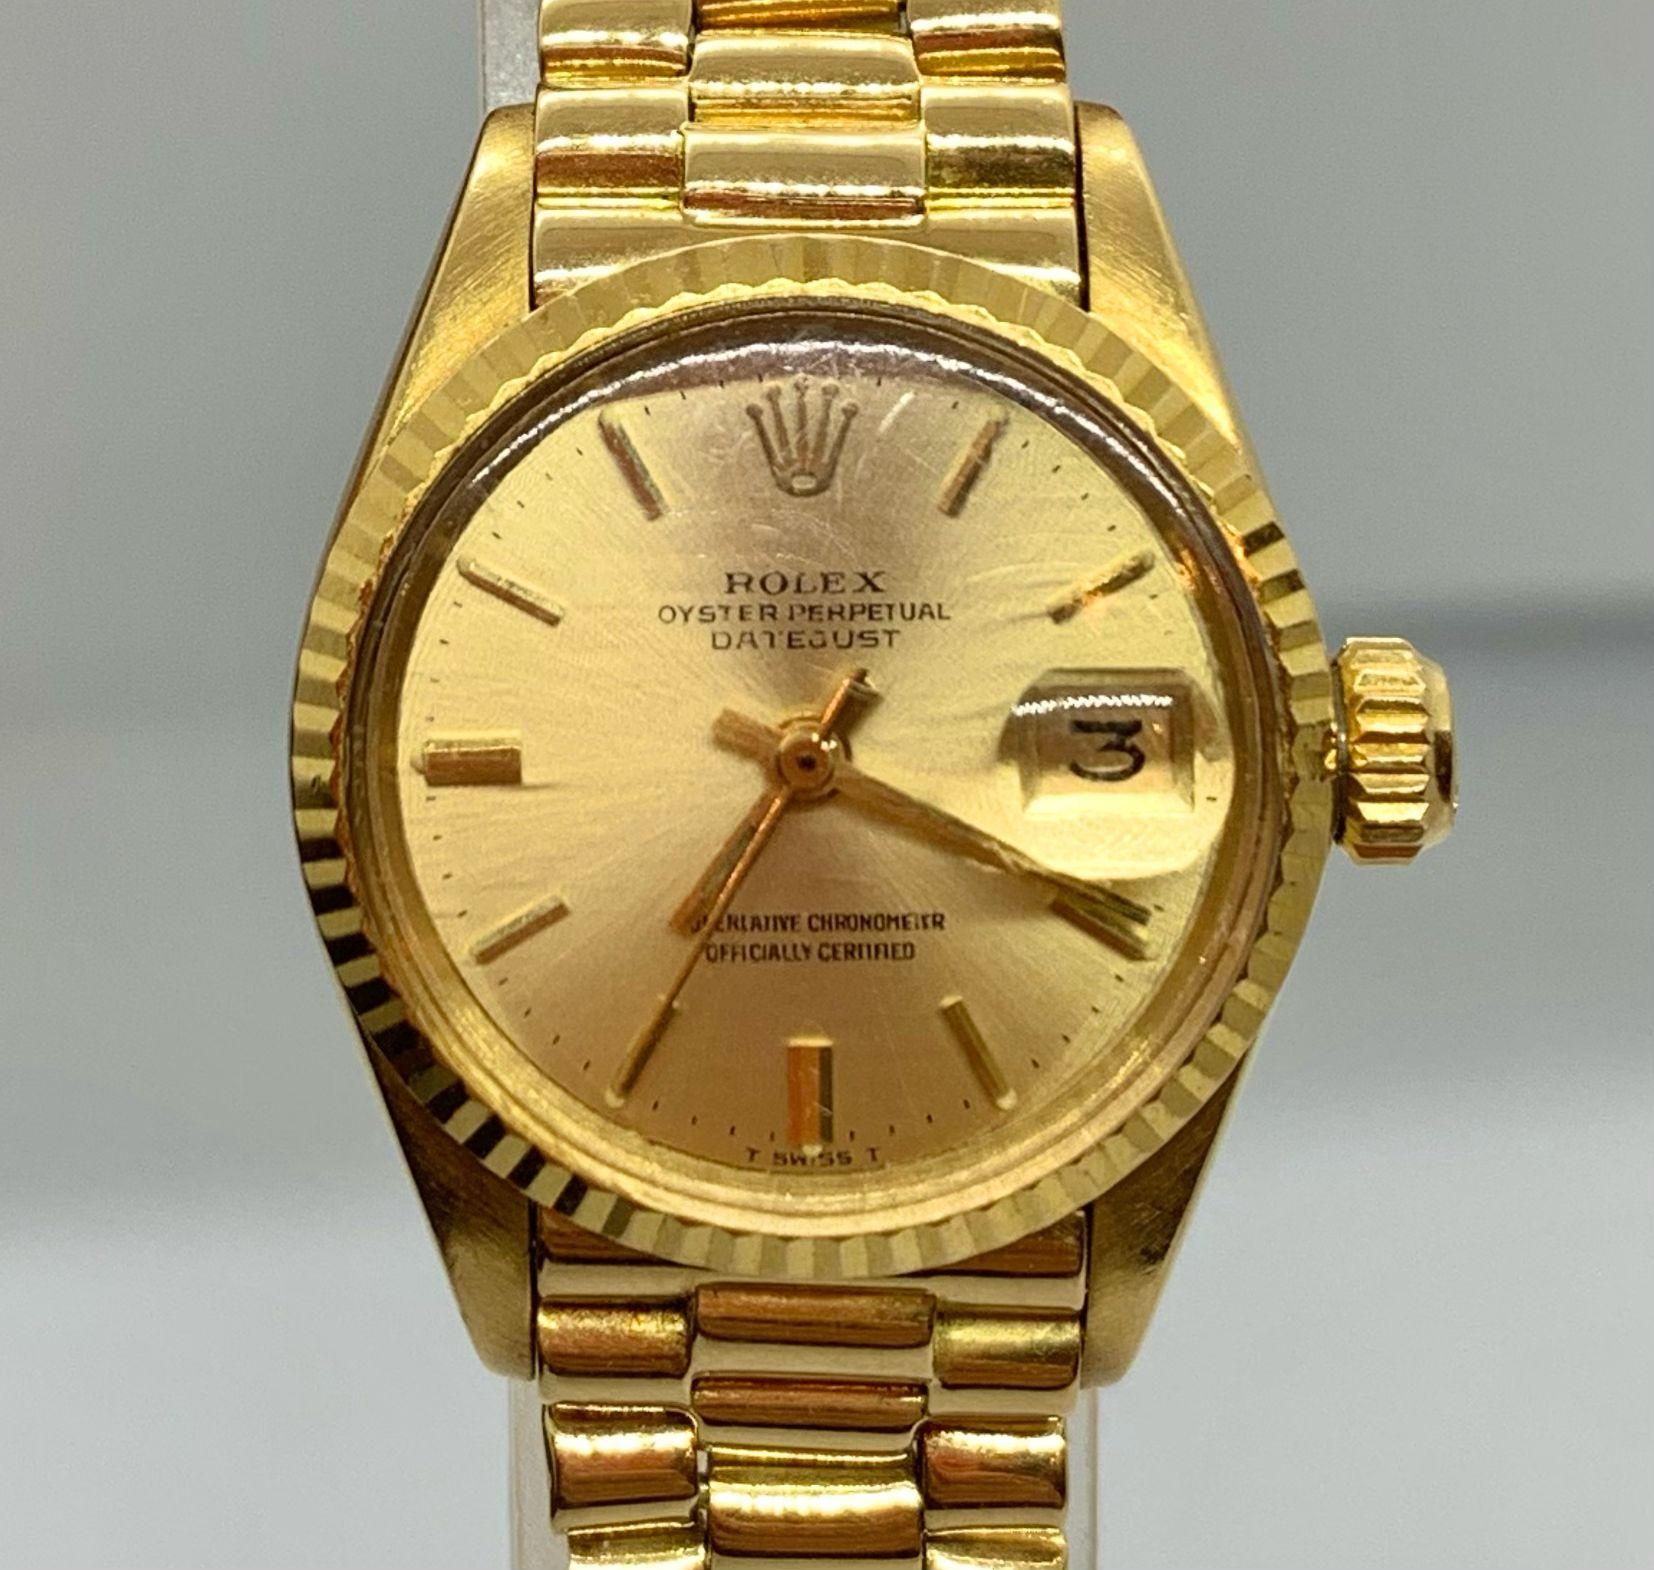 Rolex Oyster Perpetual Datejust 6917
For Women, 70's
Wonderful Rolex made in yellow gold, 18 carats. All the characteristics are detailed below... if you want to know any other information, do not hesitate to contact us.

- Movement: Automatic